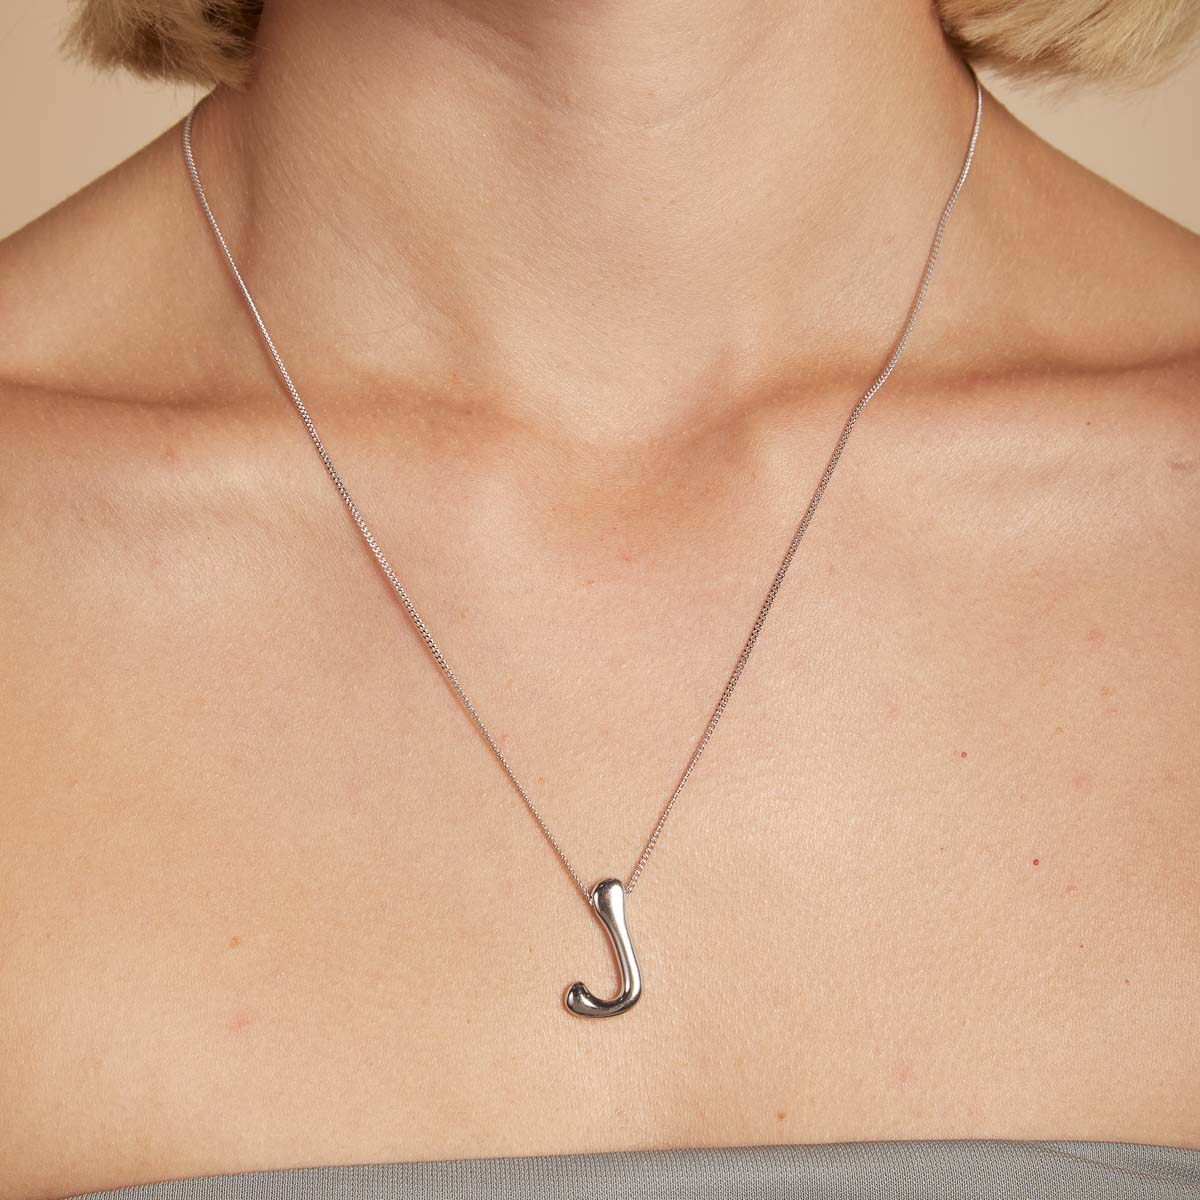 J Initial Bold Pendant Necklace in Silver